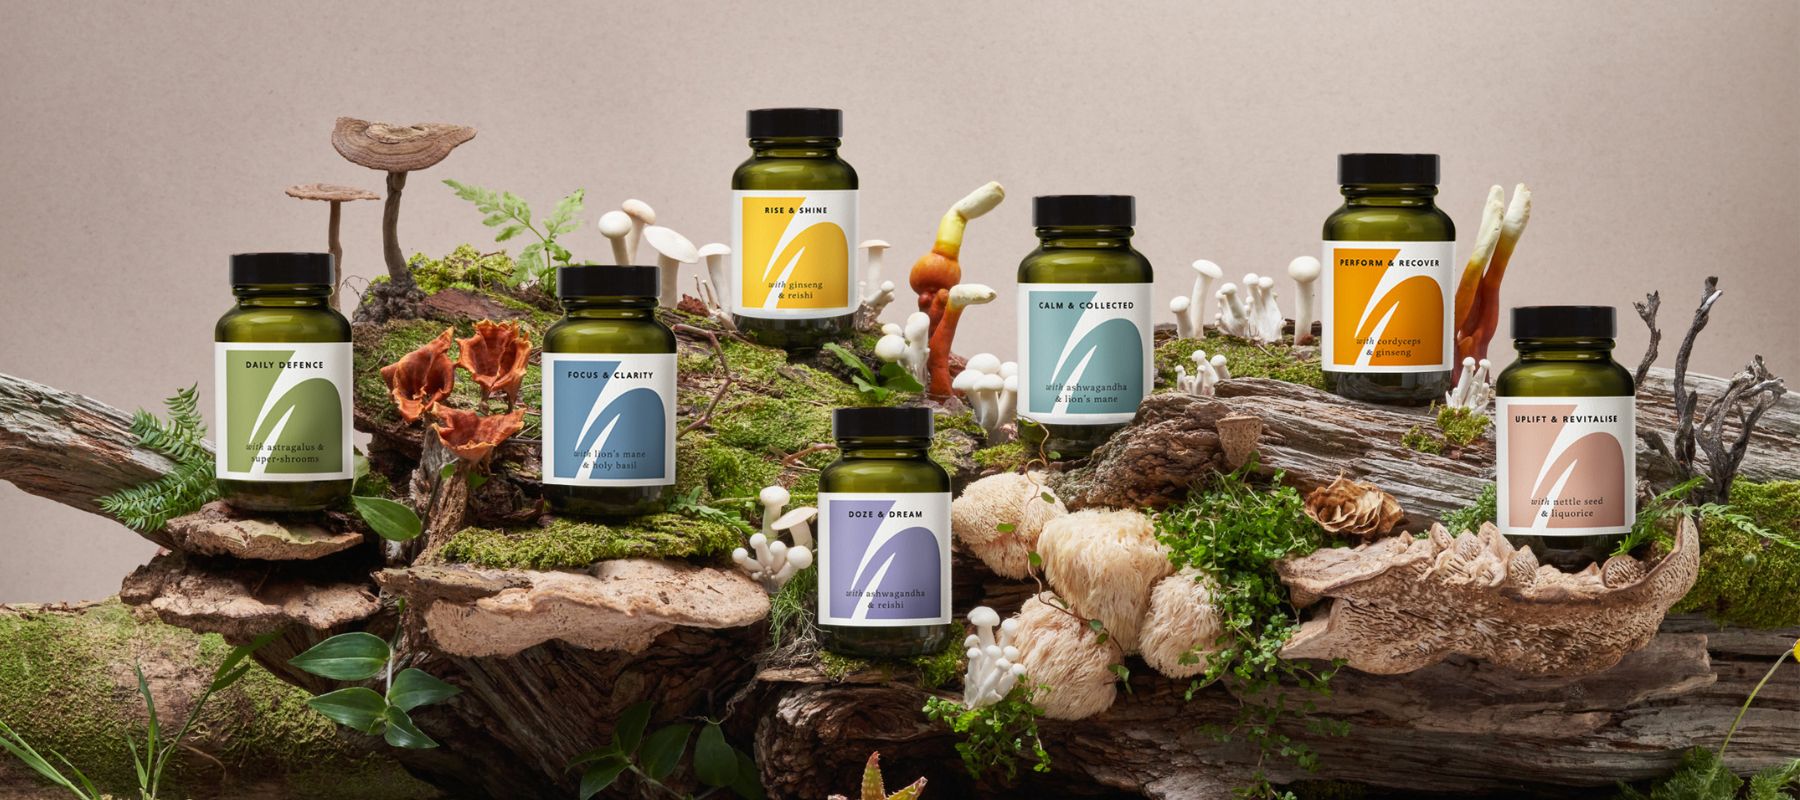 Natural adaptogen and functional herb products for sleep, energy, immunity, stress and physical performance